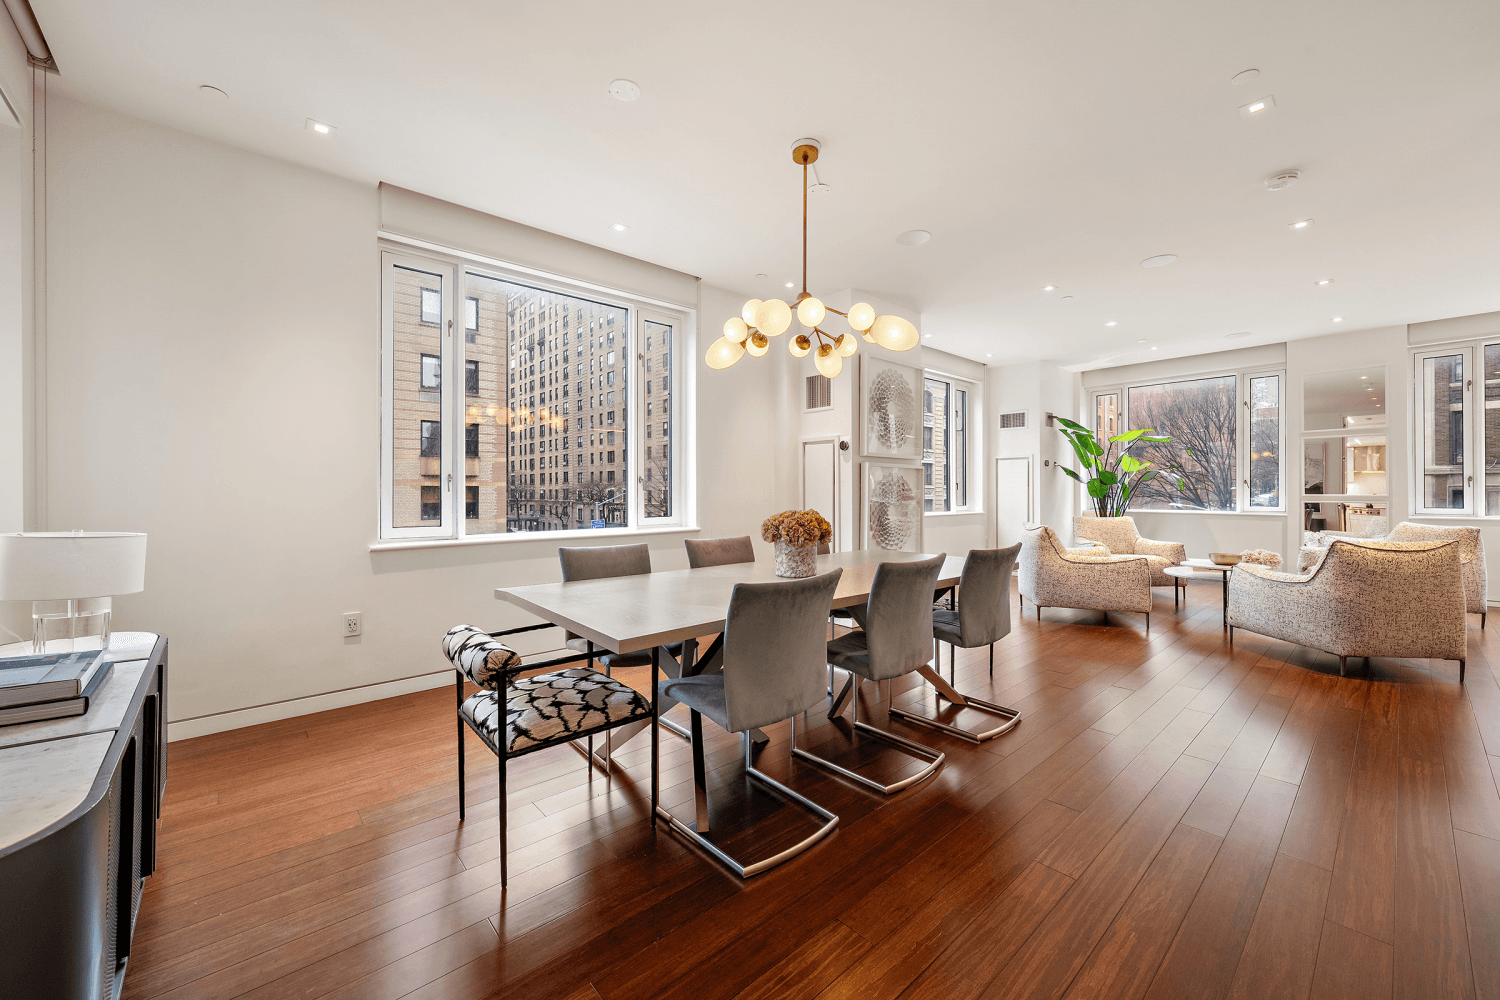 Introducing an exceptional opportunity to own a stunning home on a Central Park block in Carnegie Hill.